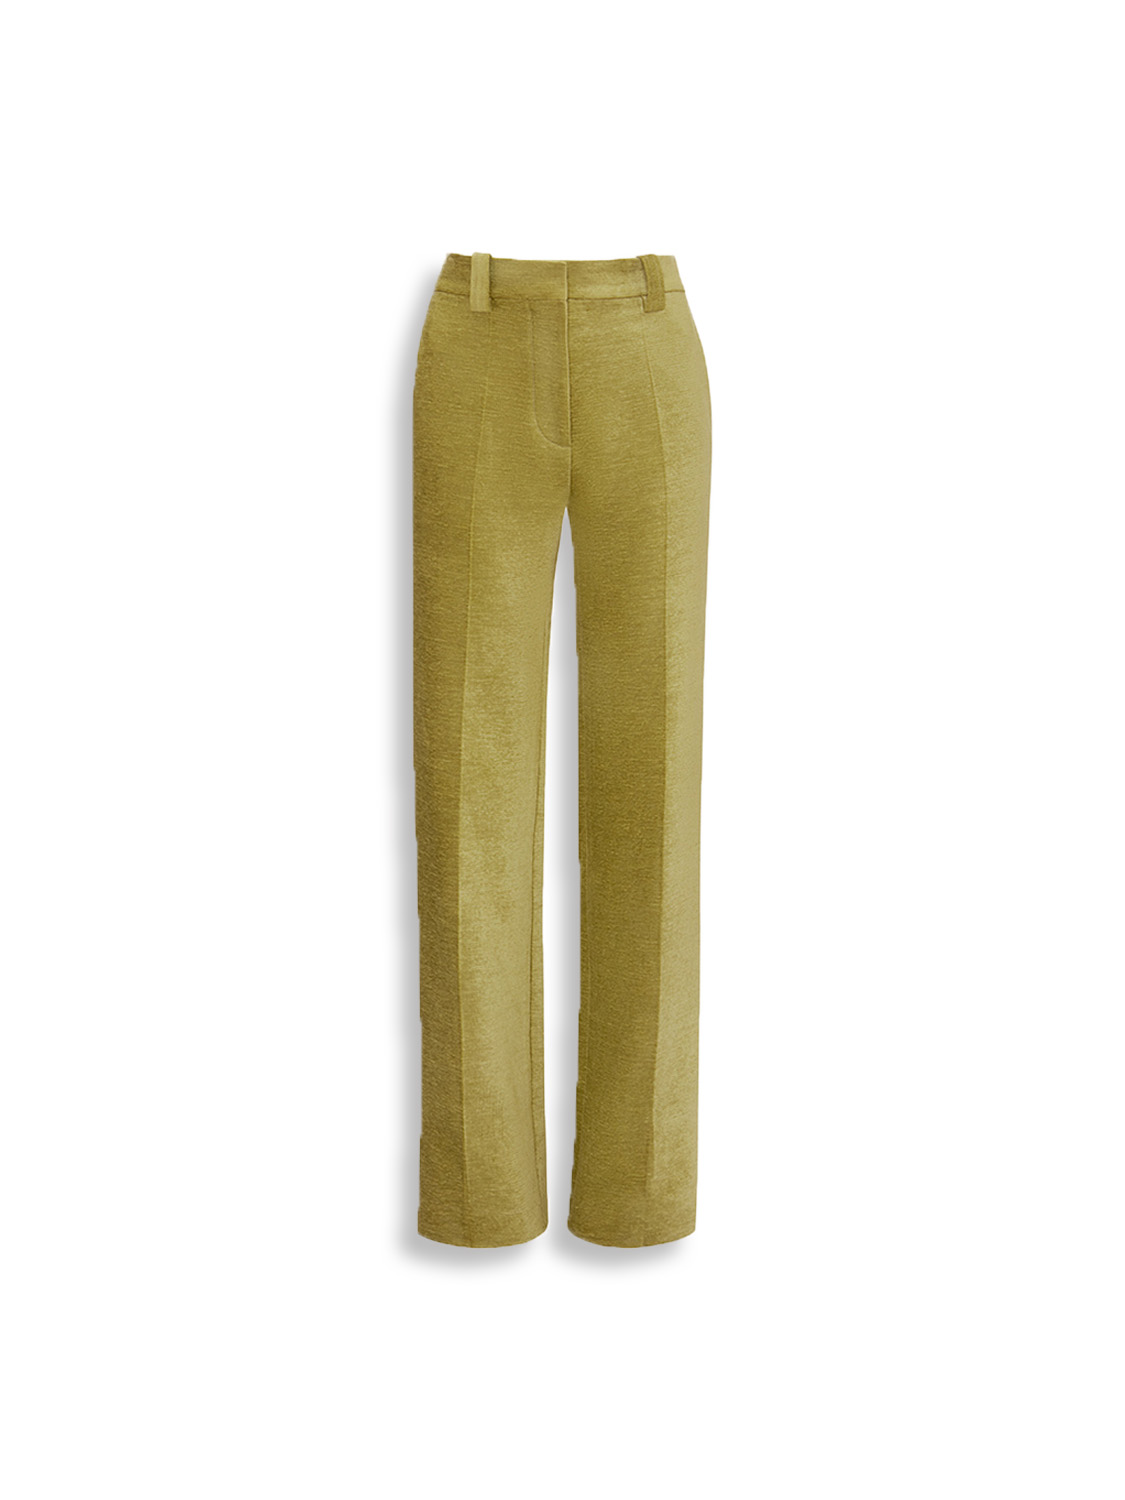 Lux Chenille Tailored Trousers - Suit style trousers with wide leg